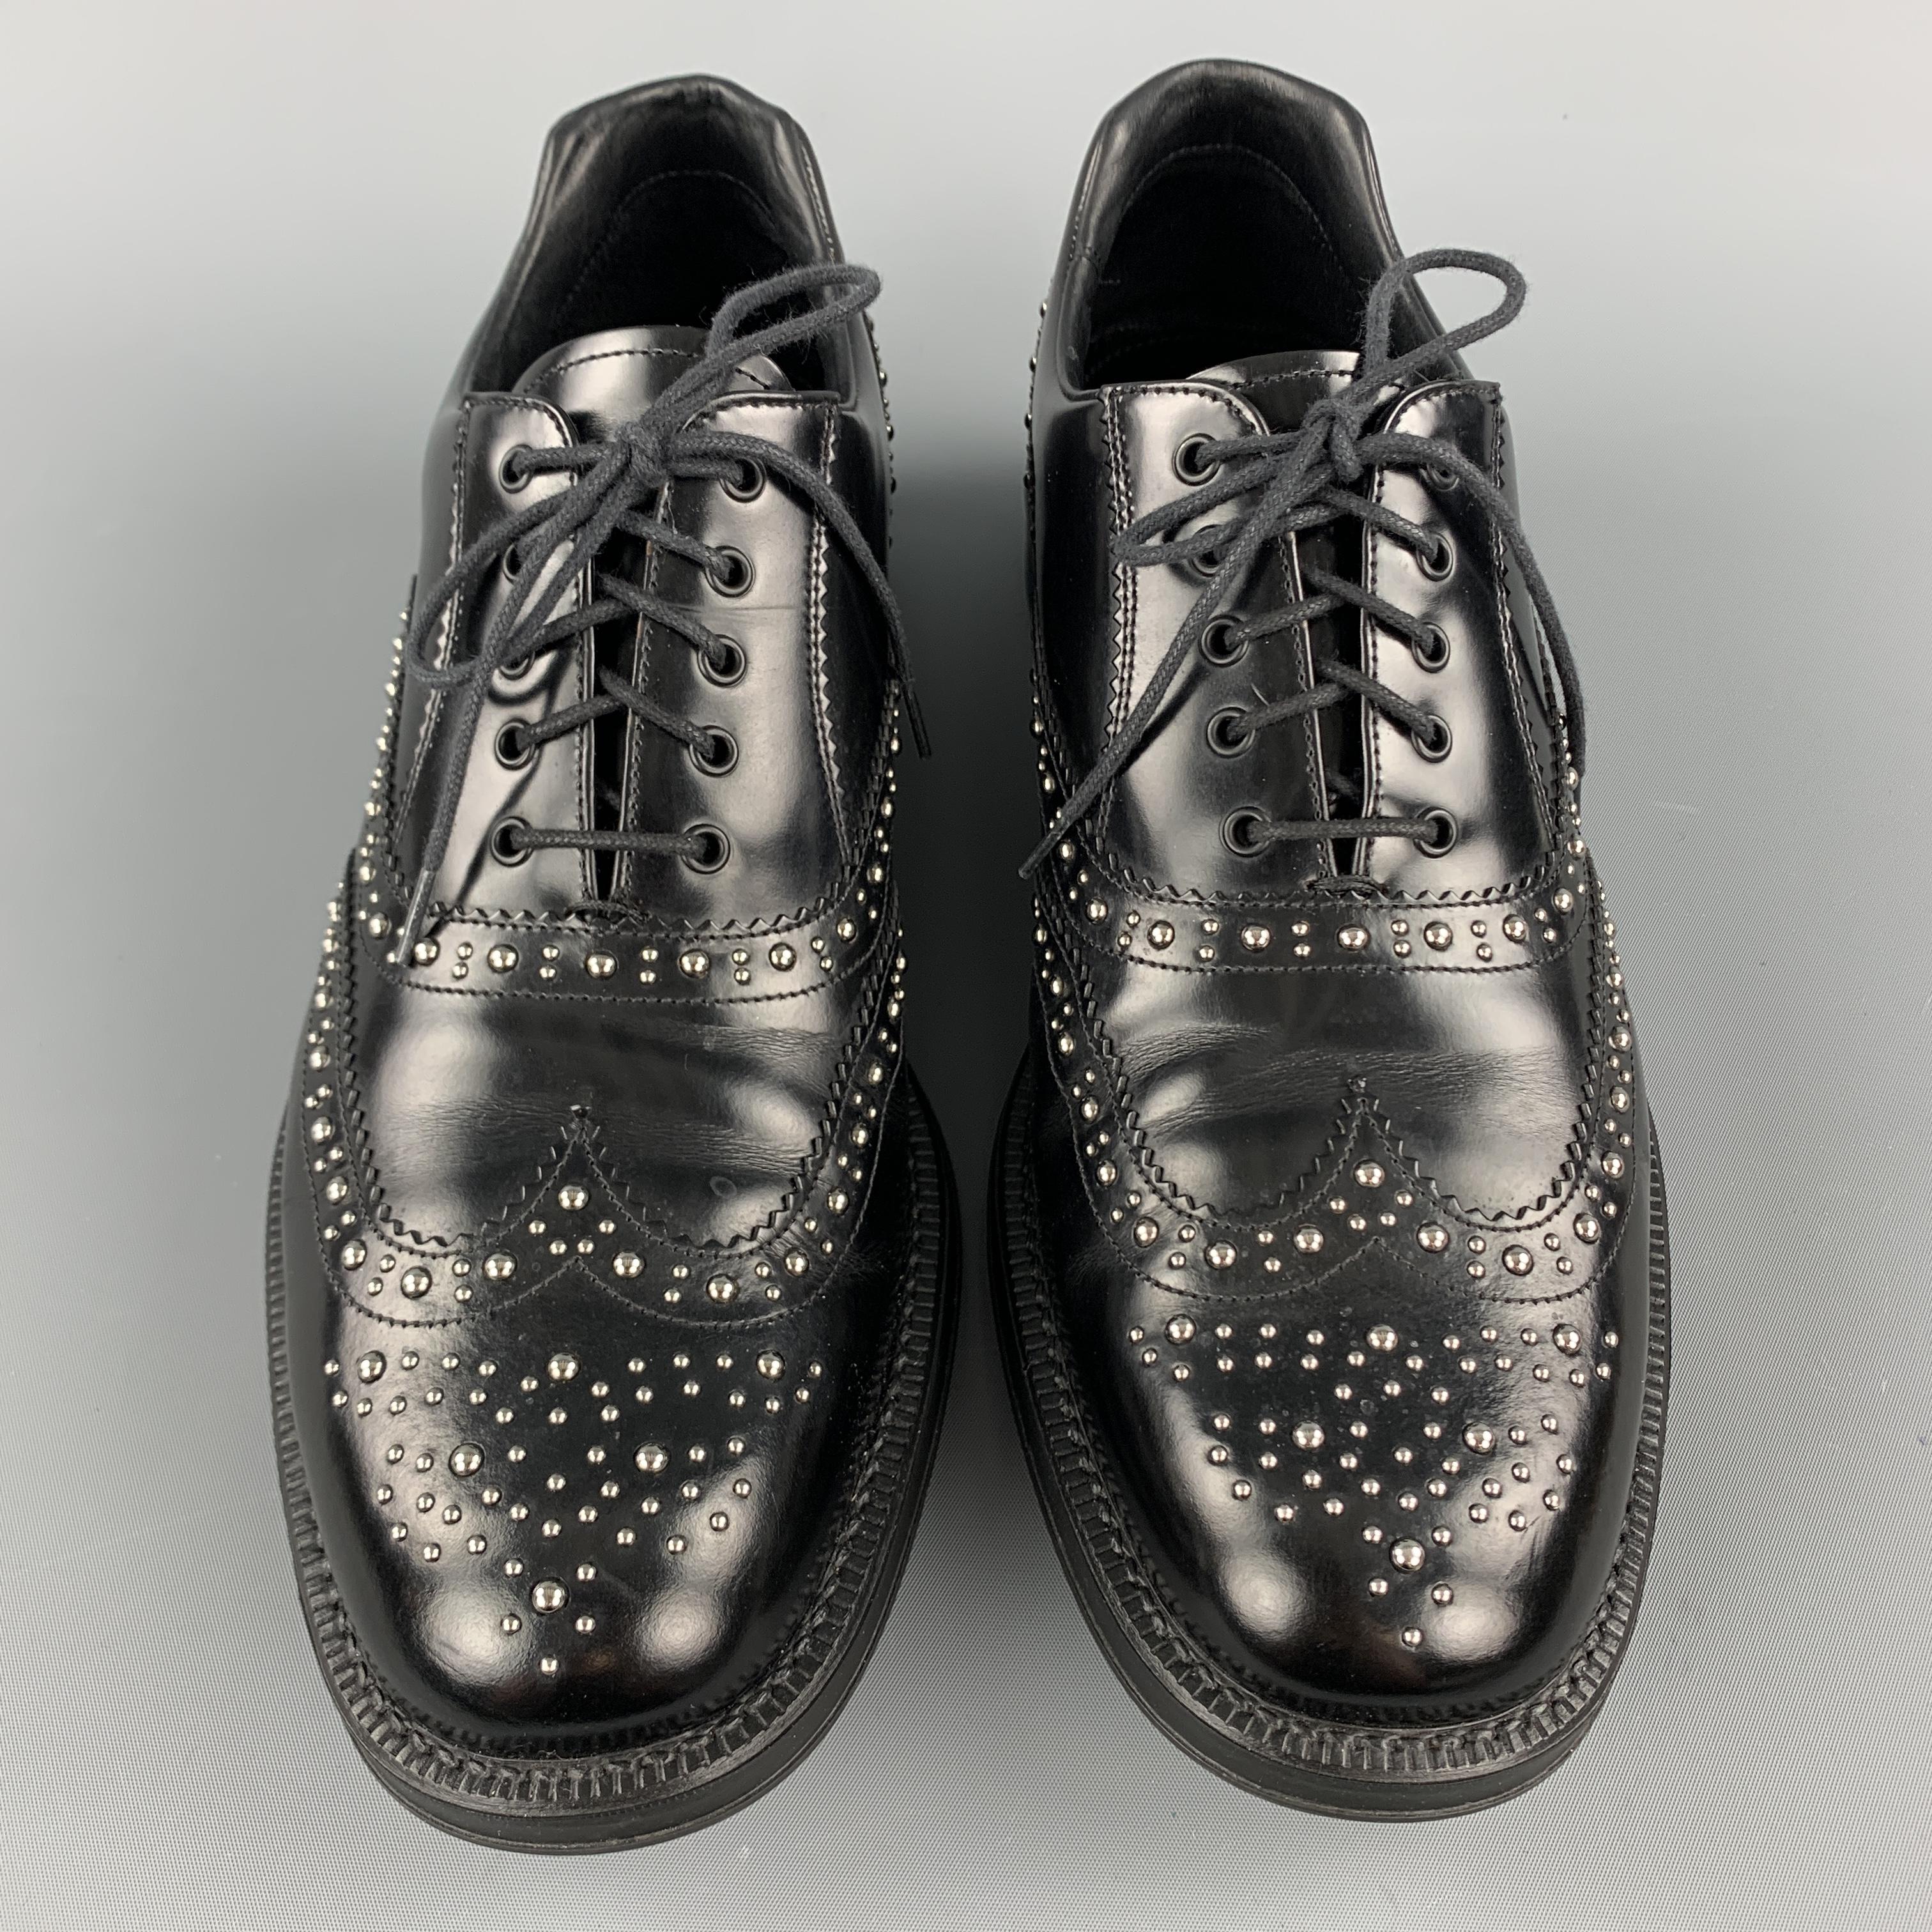 PRADA oxford dress shoes come in black leather with broguing throughout, wingtip, rubber sole, and silver tone studs. With box. Made in Italy.

Excellent Pre-Owned Condition.
Marked: UK 8.5

Outsole: 12 x 4 in.